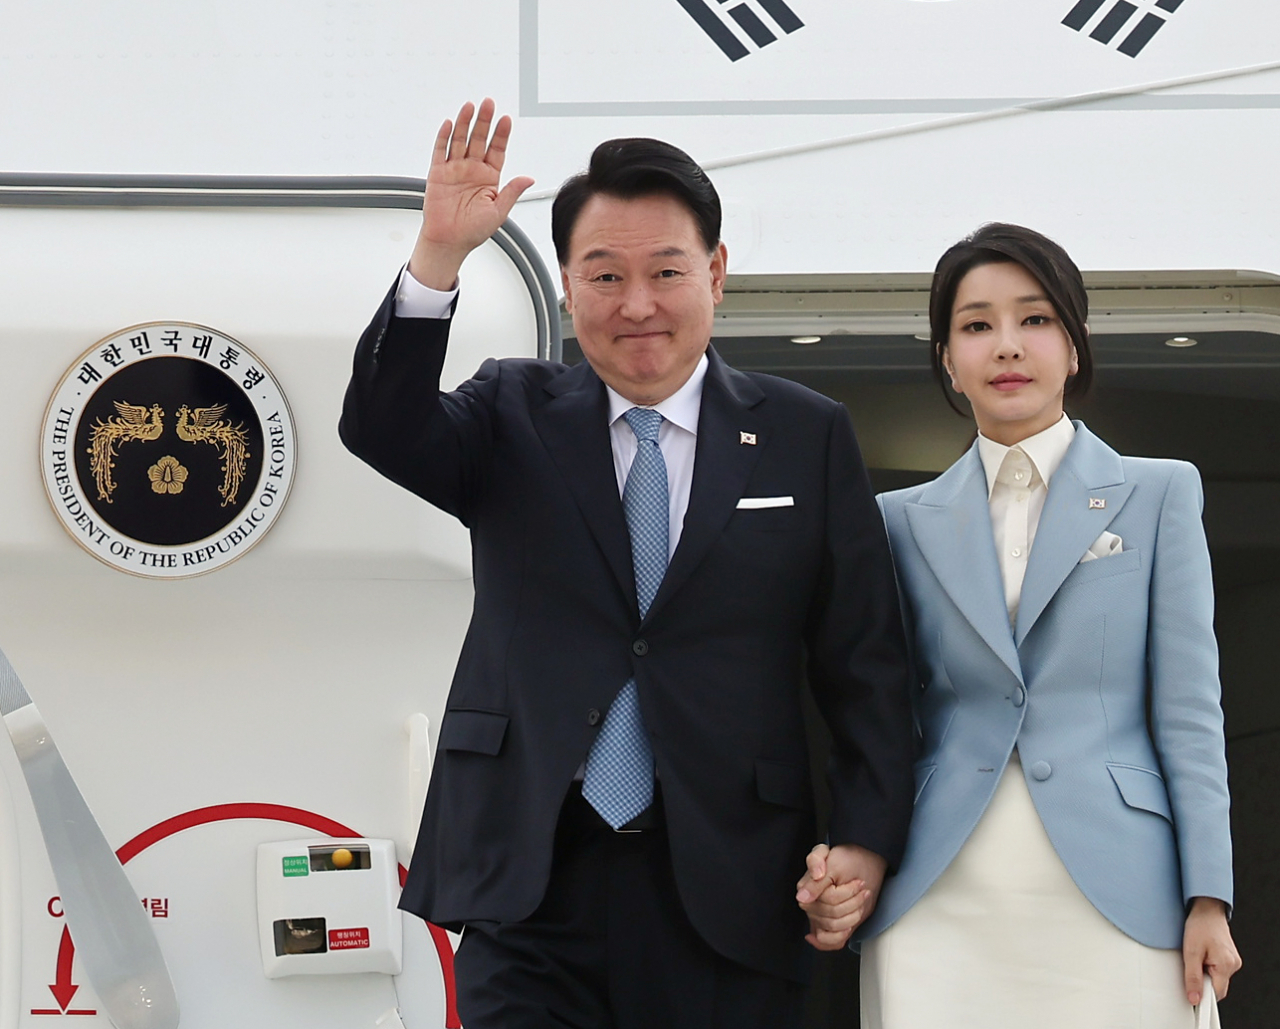 South Korean President Yoon Suk Yeol (left) and first lady Kim Keon Hee arrive at Warsaw Chopin Airport on Wednesday (Yonhap)